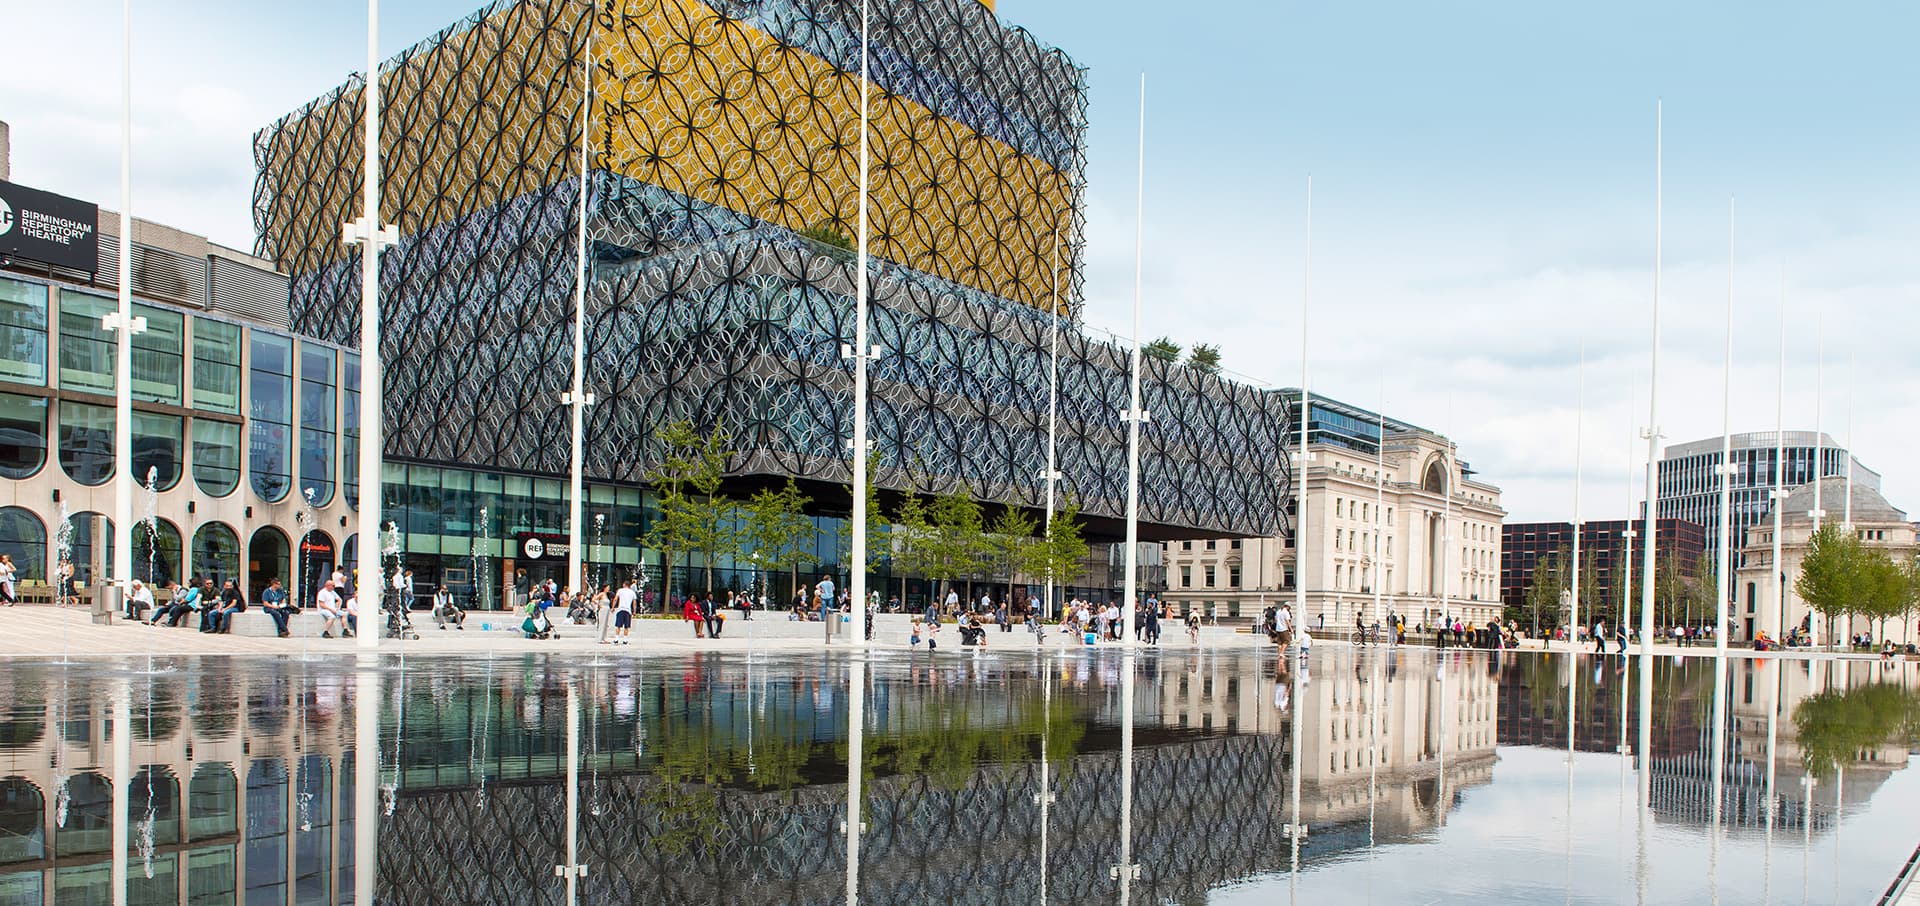 View of Centenary Square, showing the Birmingham Library and Baskerville House